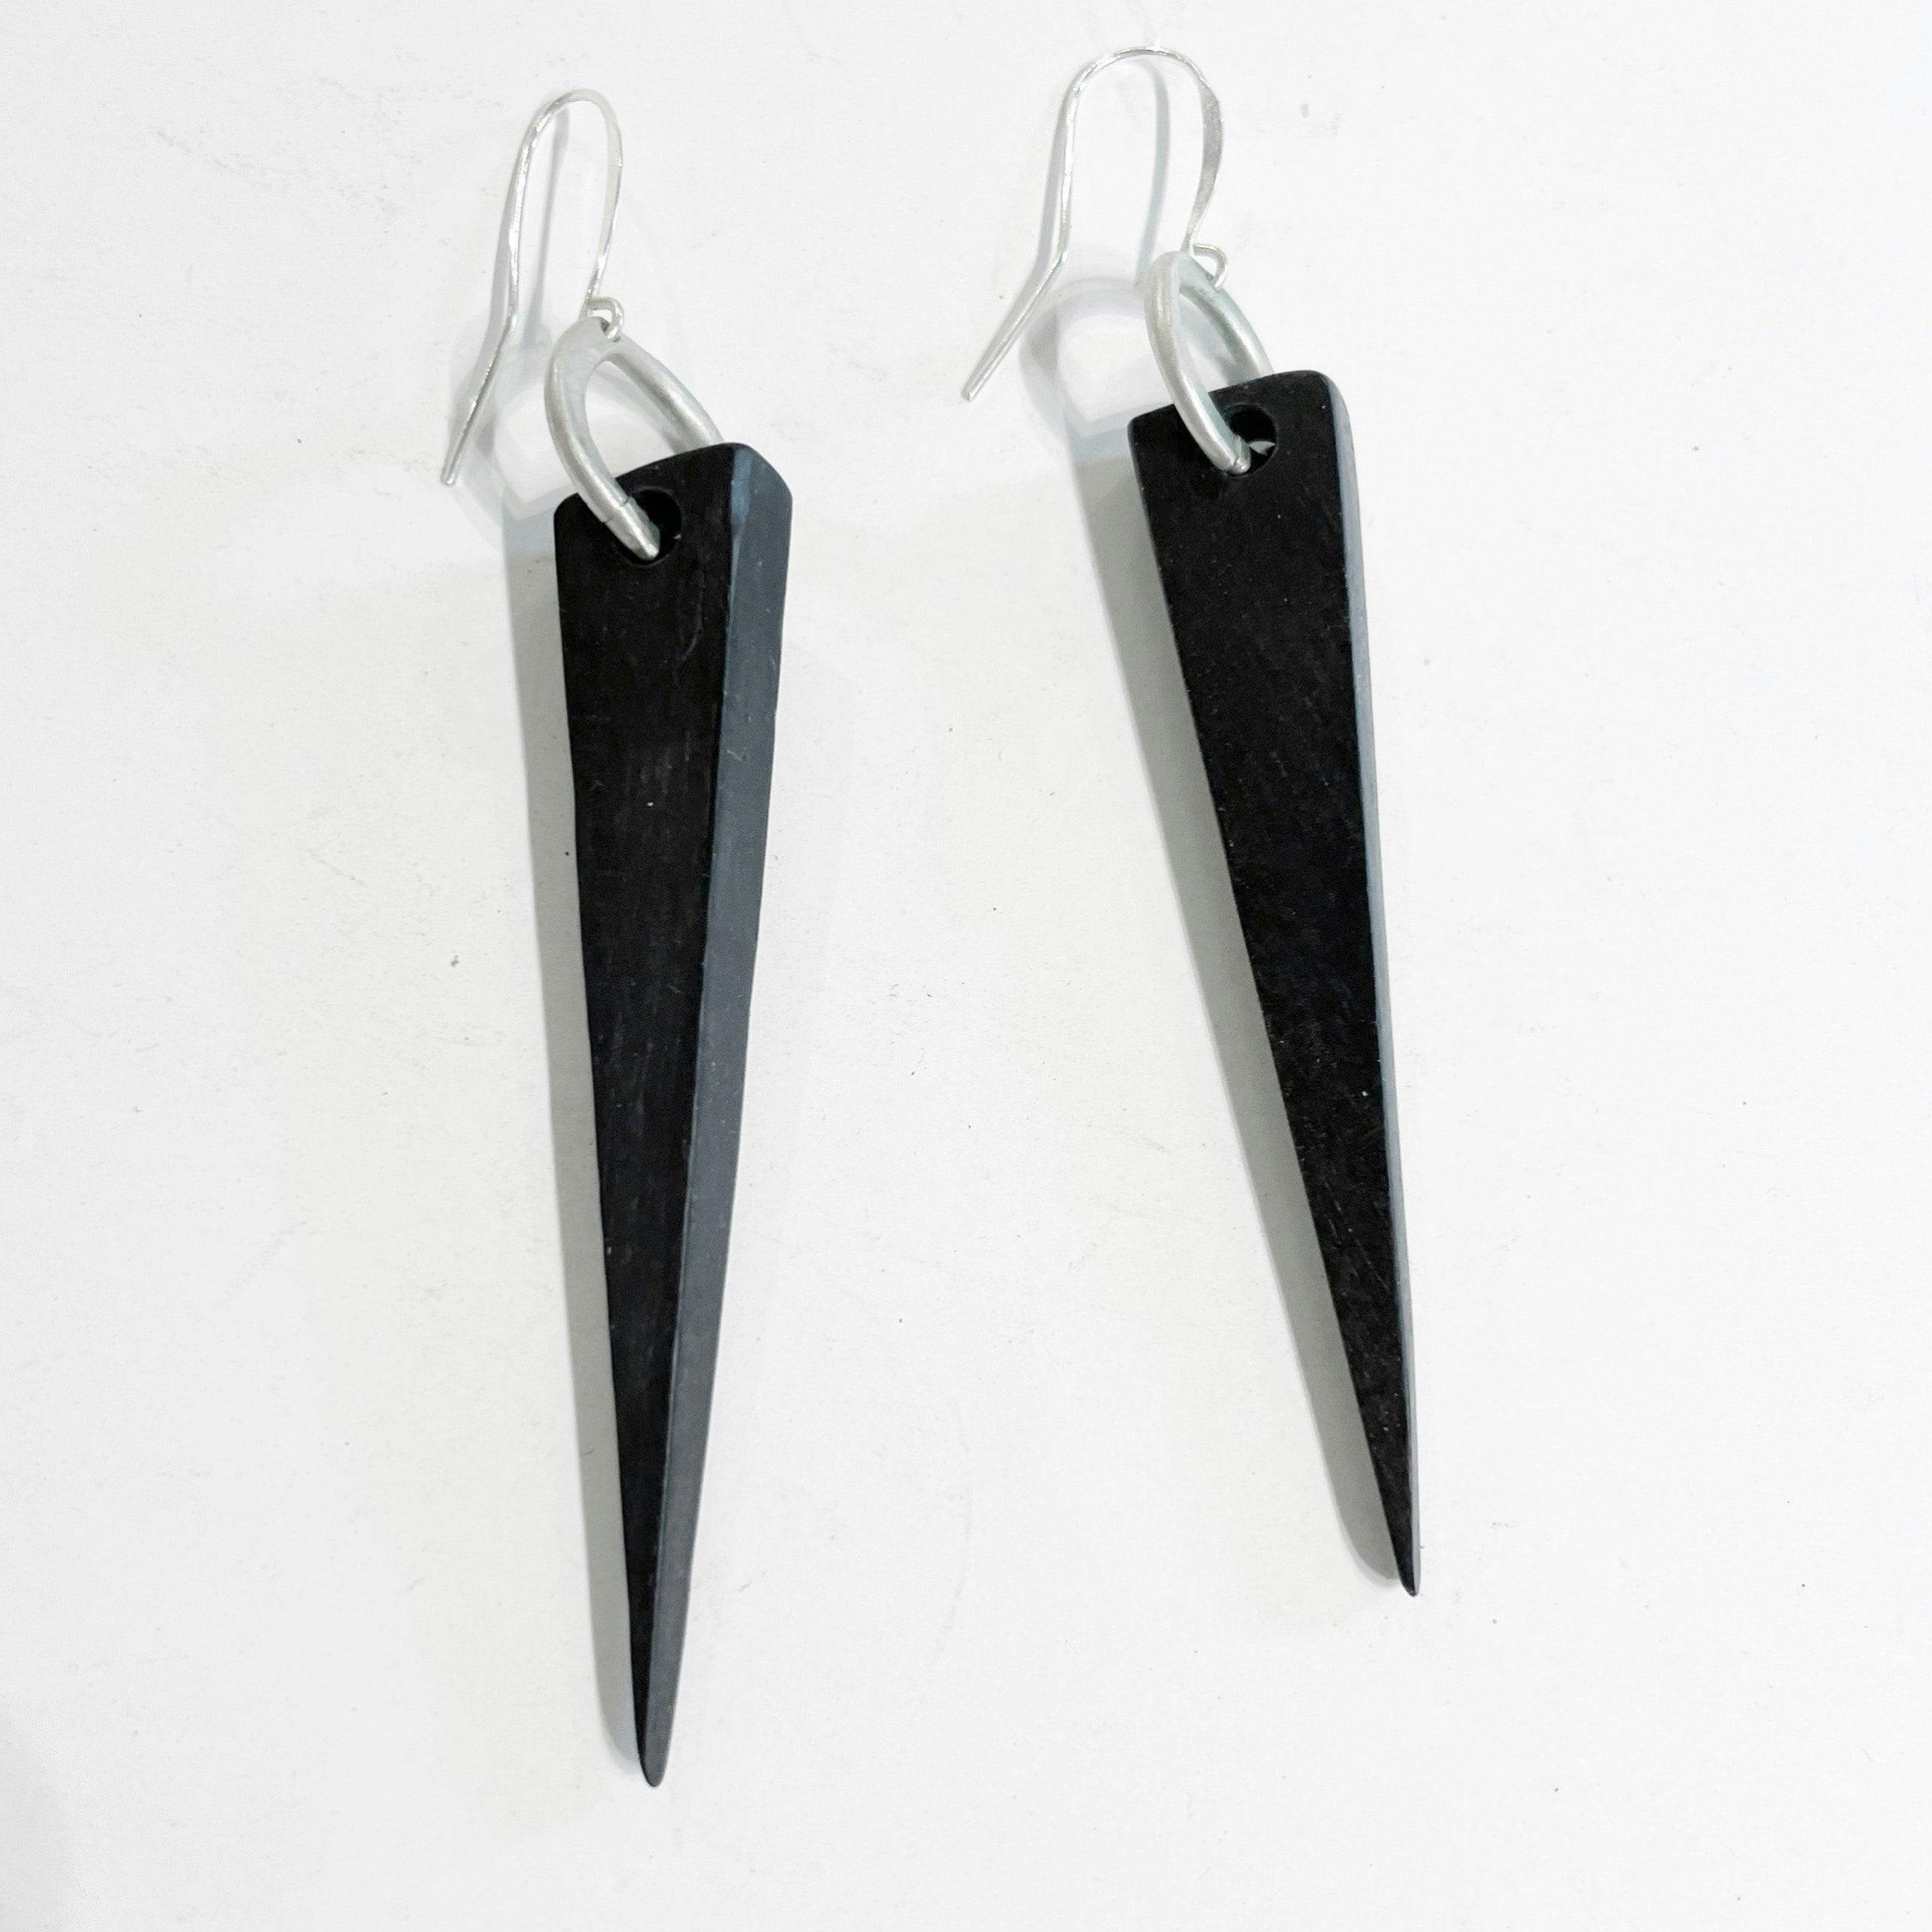 Jagger Earrings, a product by Jenny Greco Jewellery